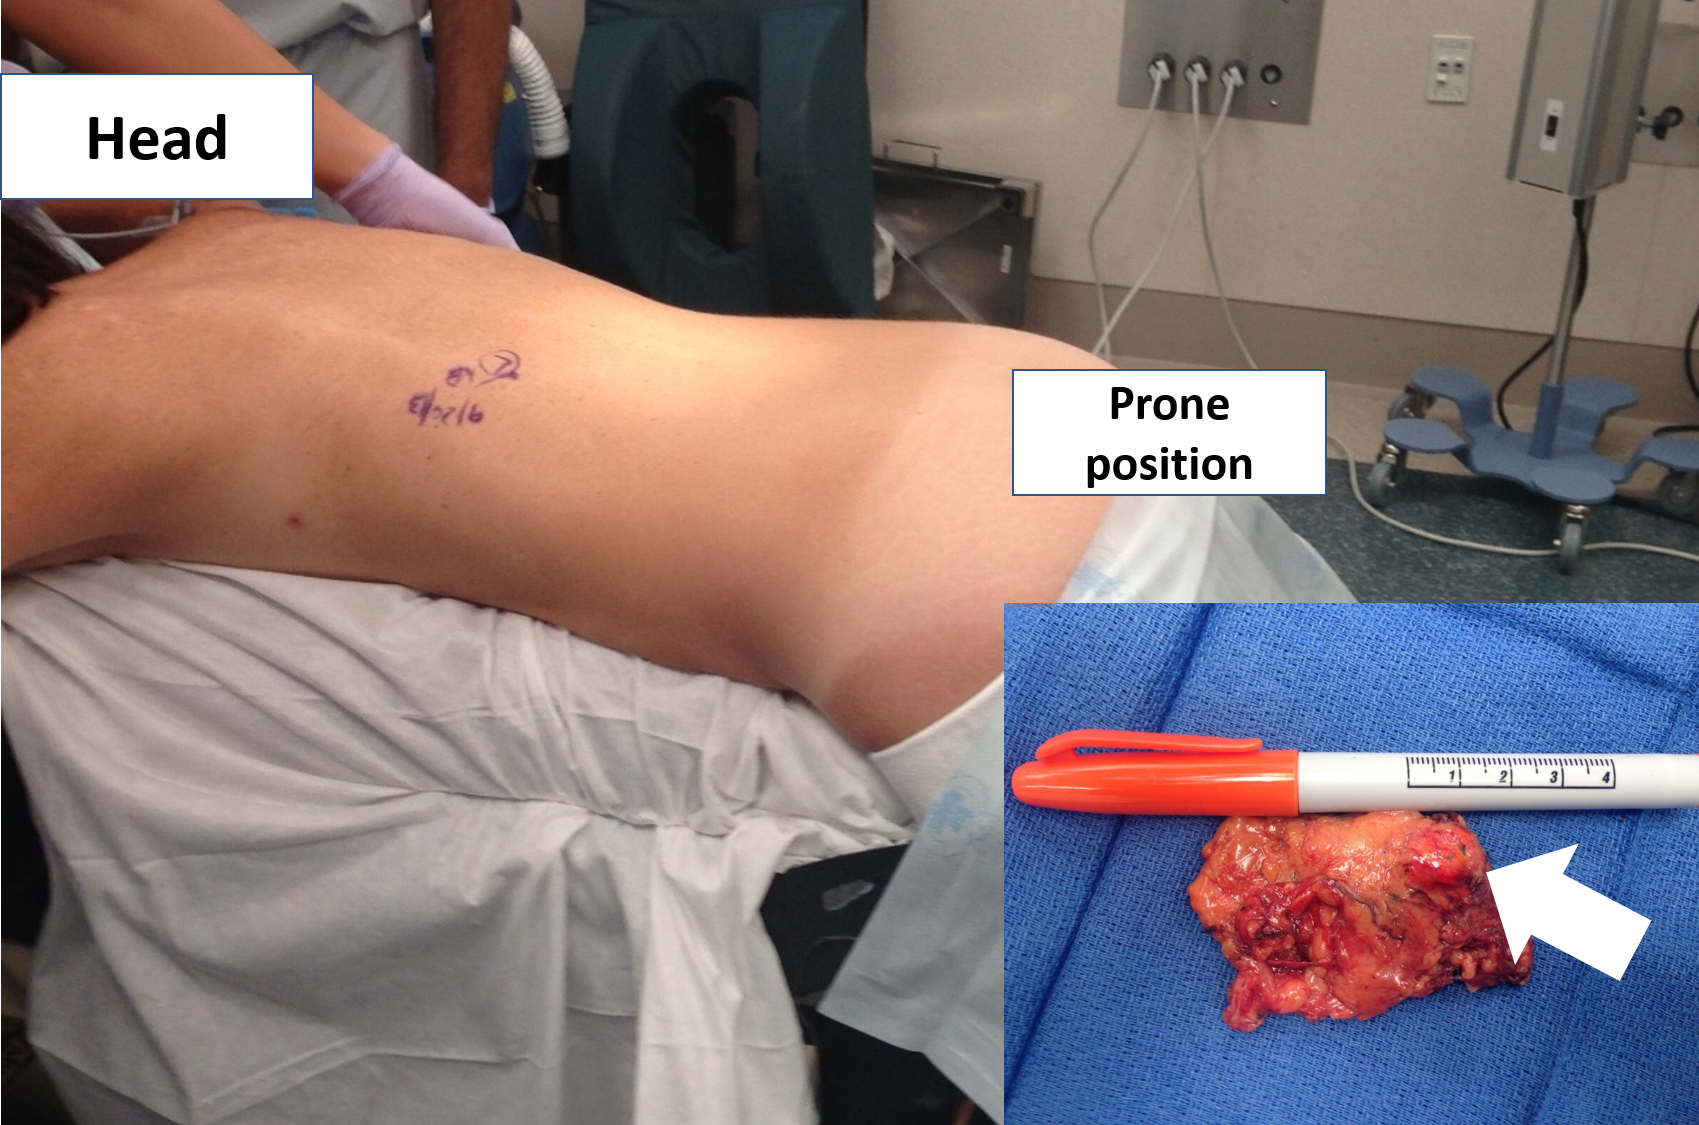 The correct prone position of a patient undergoing a left Mini Back Scope Adrenalectomy (MBSA).